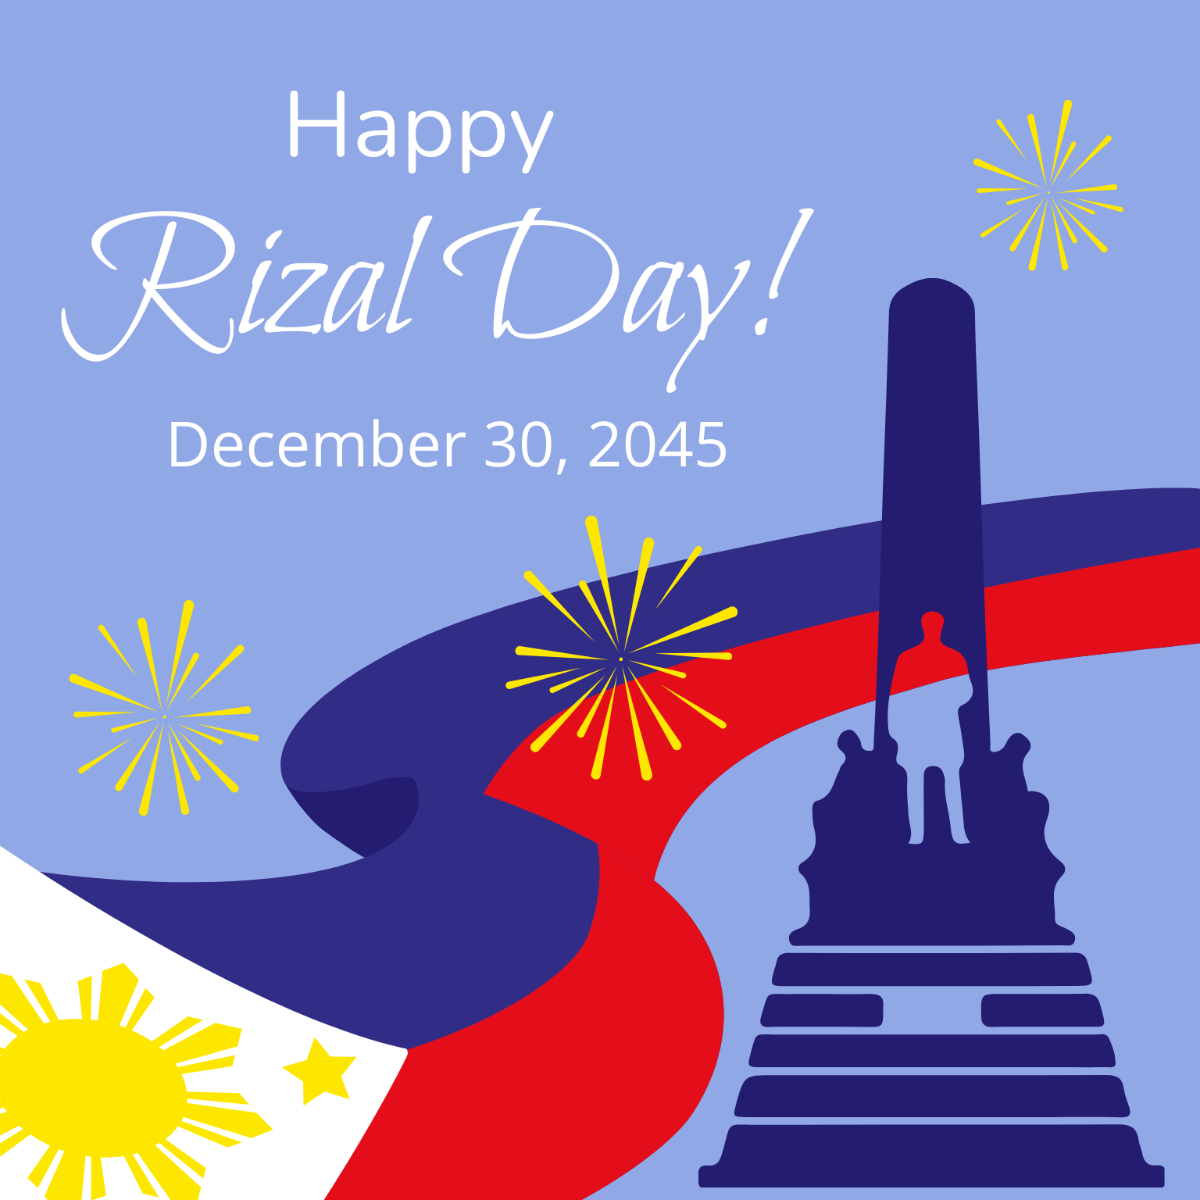 Free Rizal Day Wishes Vector Template